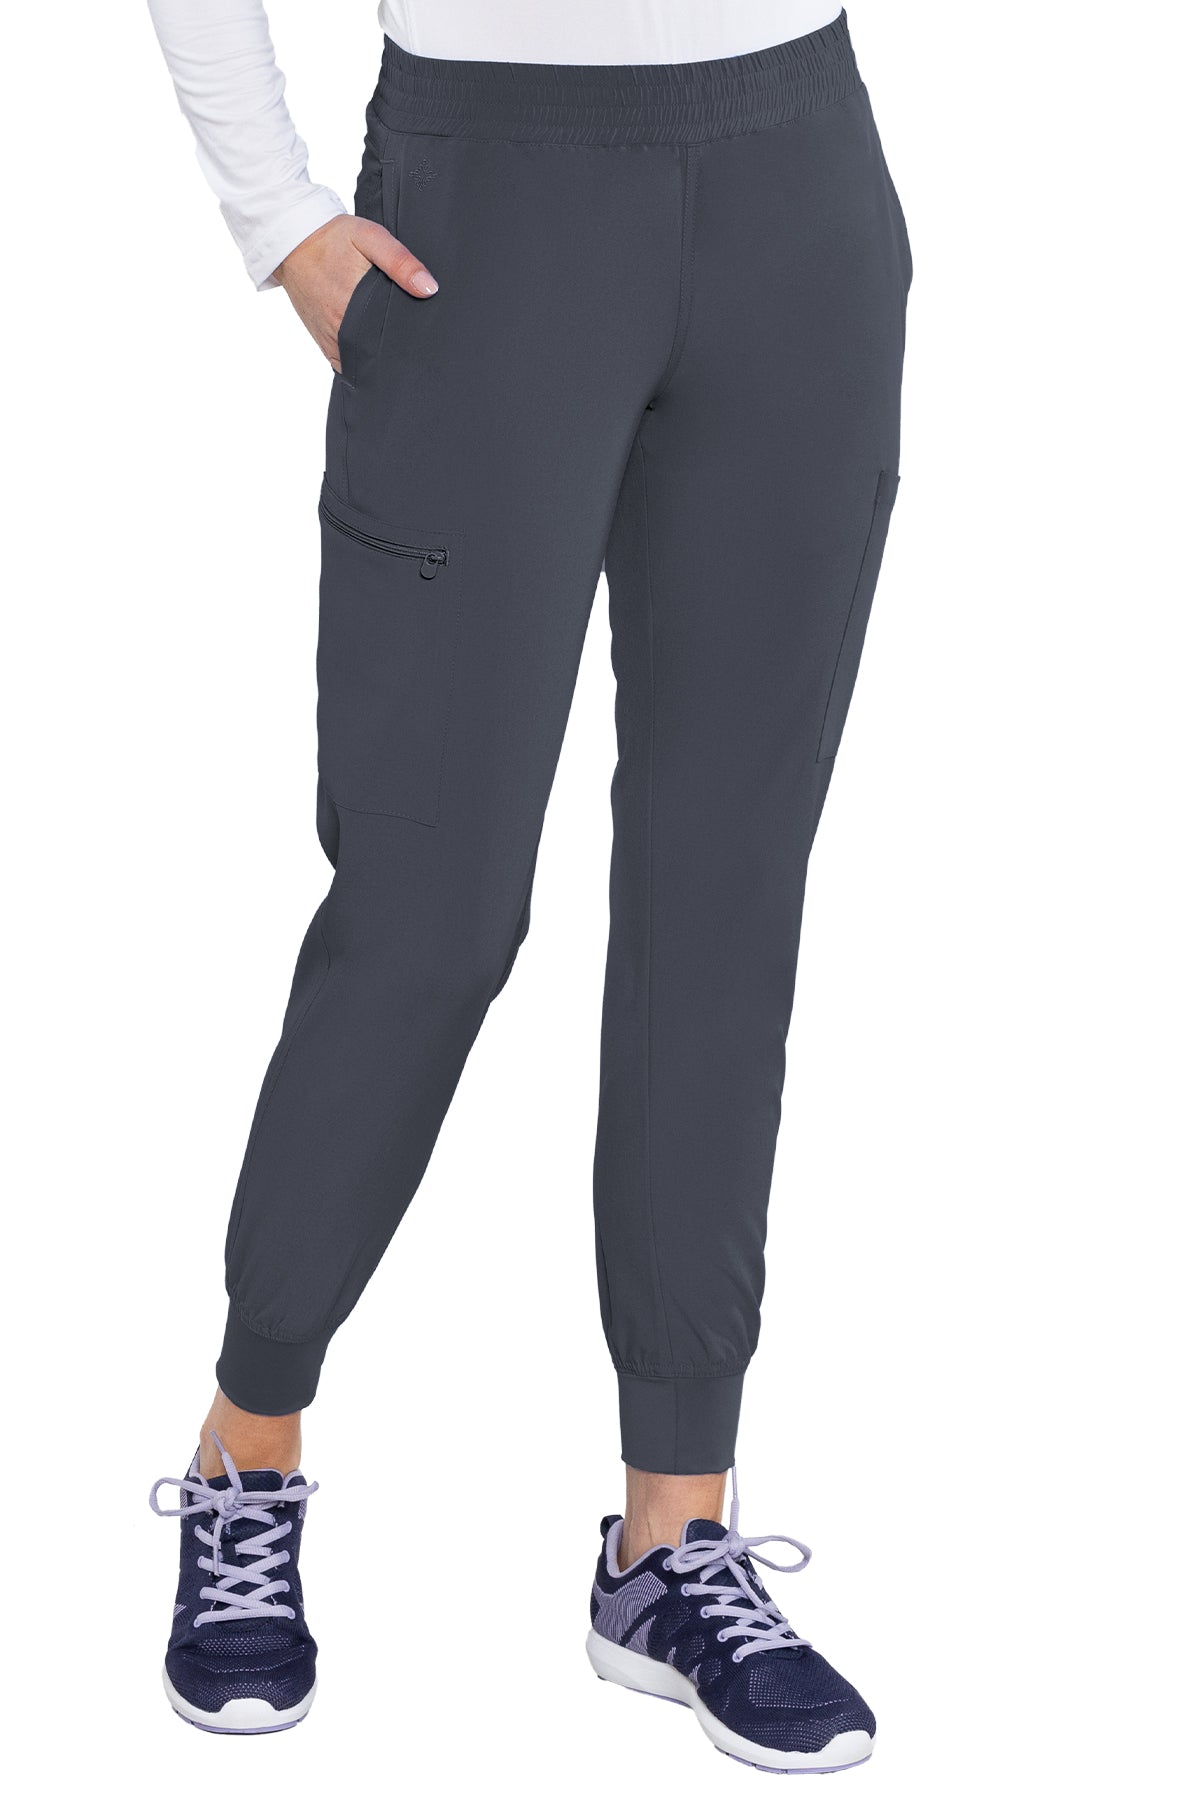 8739 - Med Couture - ENERGY -  SMOCKED WAIST JOGGER PANT XS/P/T - XL/P/T